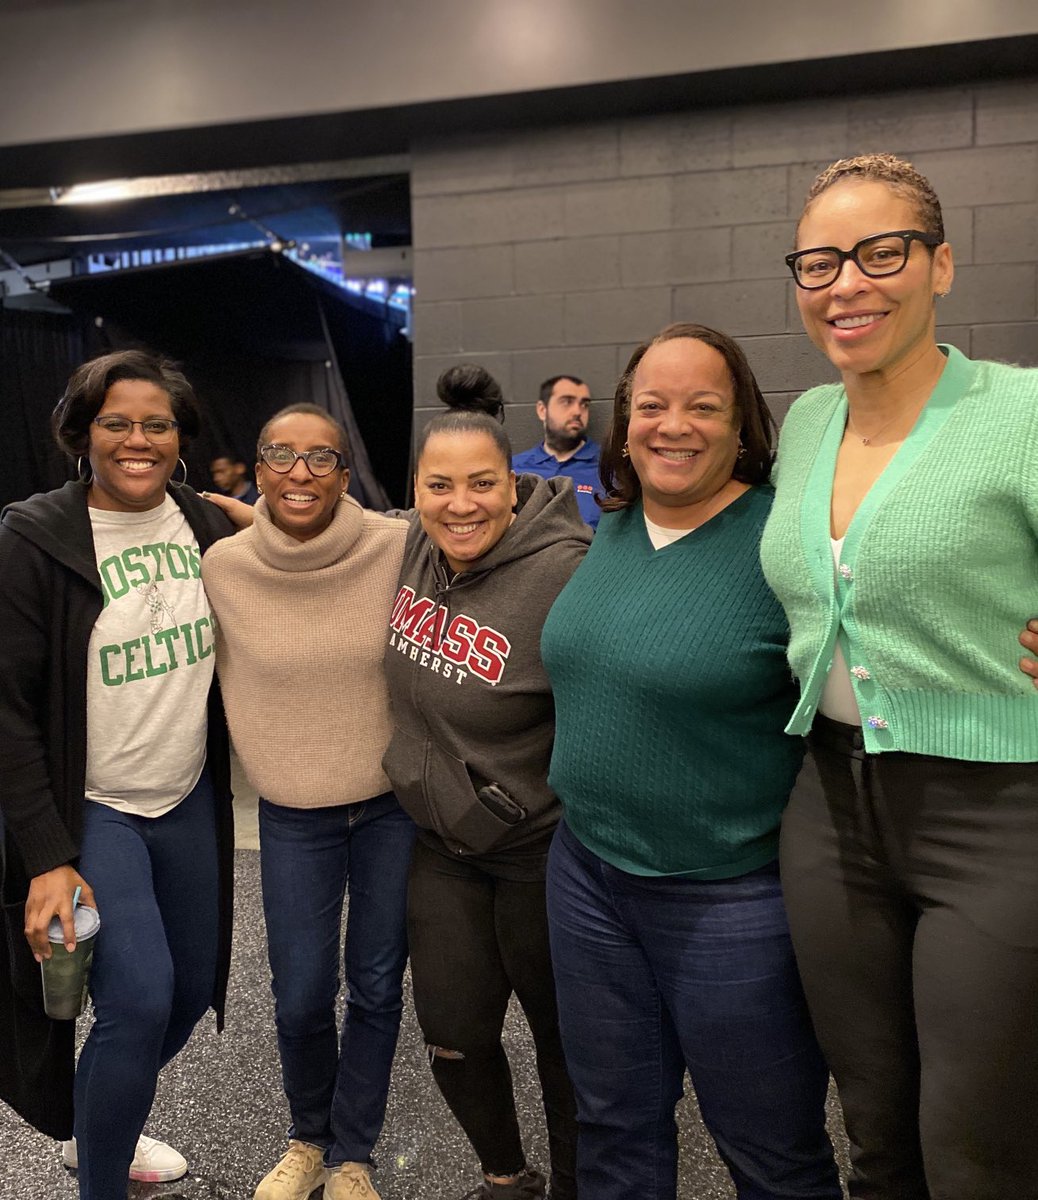 Can’t think of a better way to celebrate Bill Russell Day at TD Garden than with some amazing glass ceiling shatterers including Harvard’s new President Claudine Gay. #BlackGirlMagic #BleedGreen #Celtics